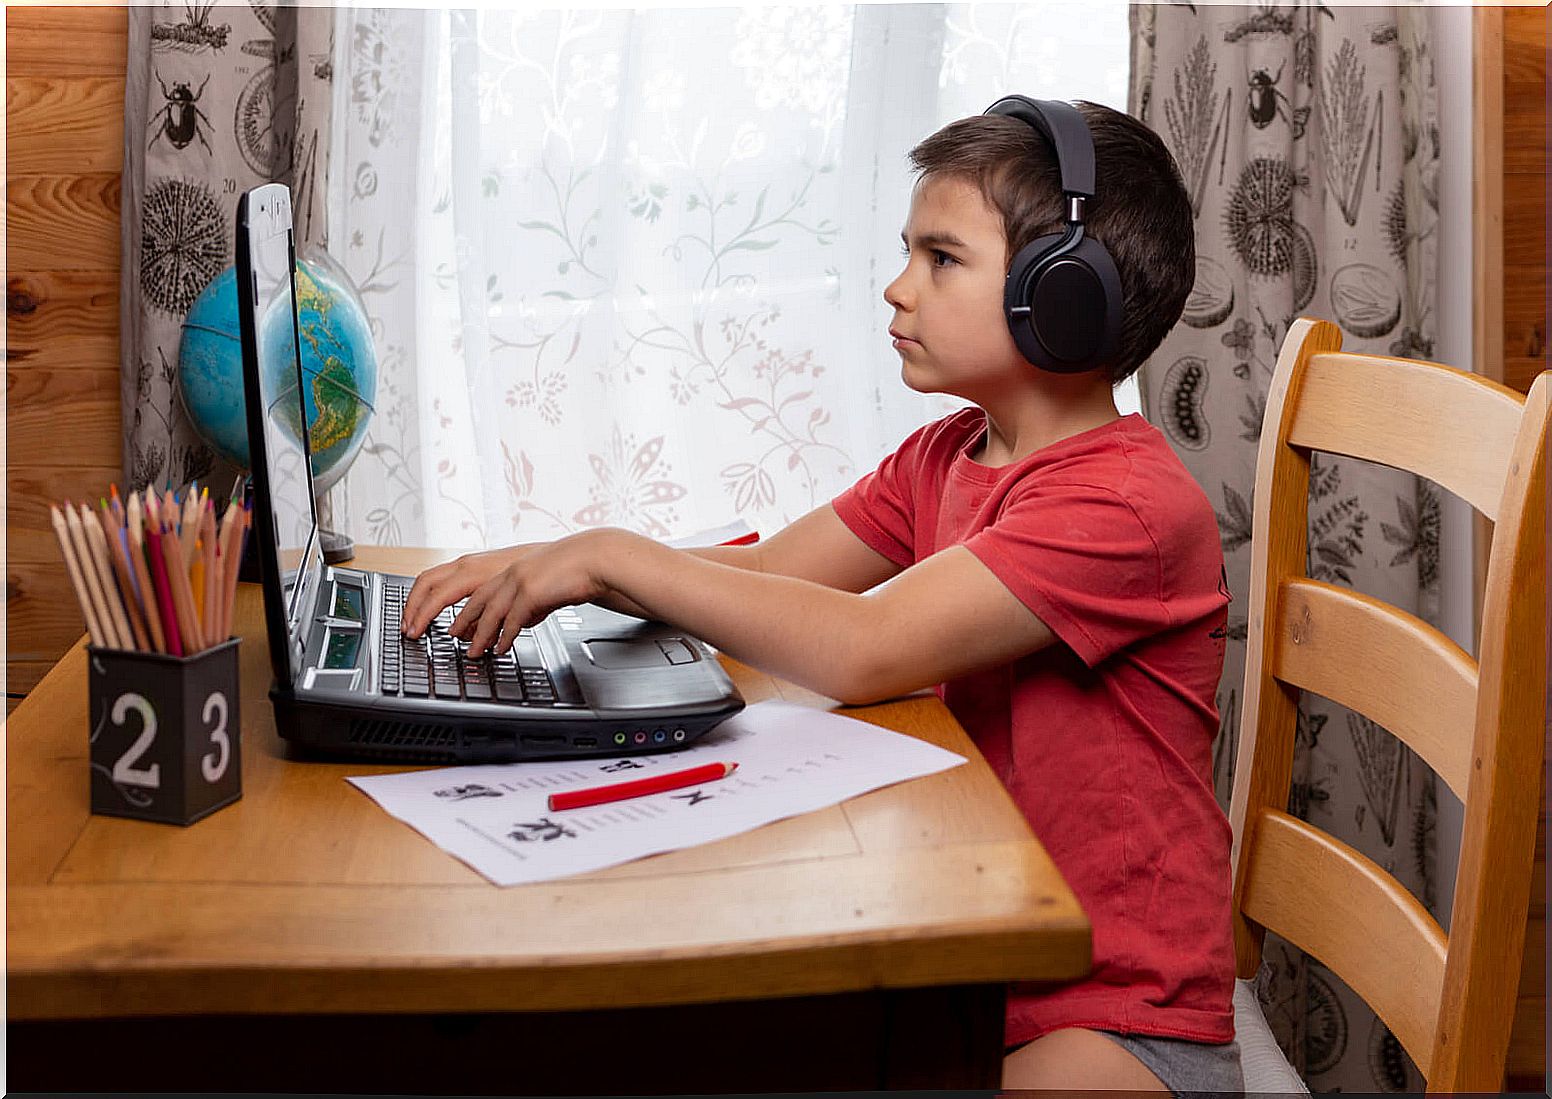 Child with computer learning typing.